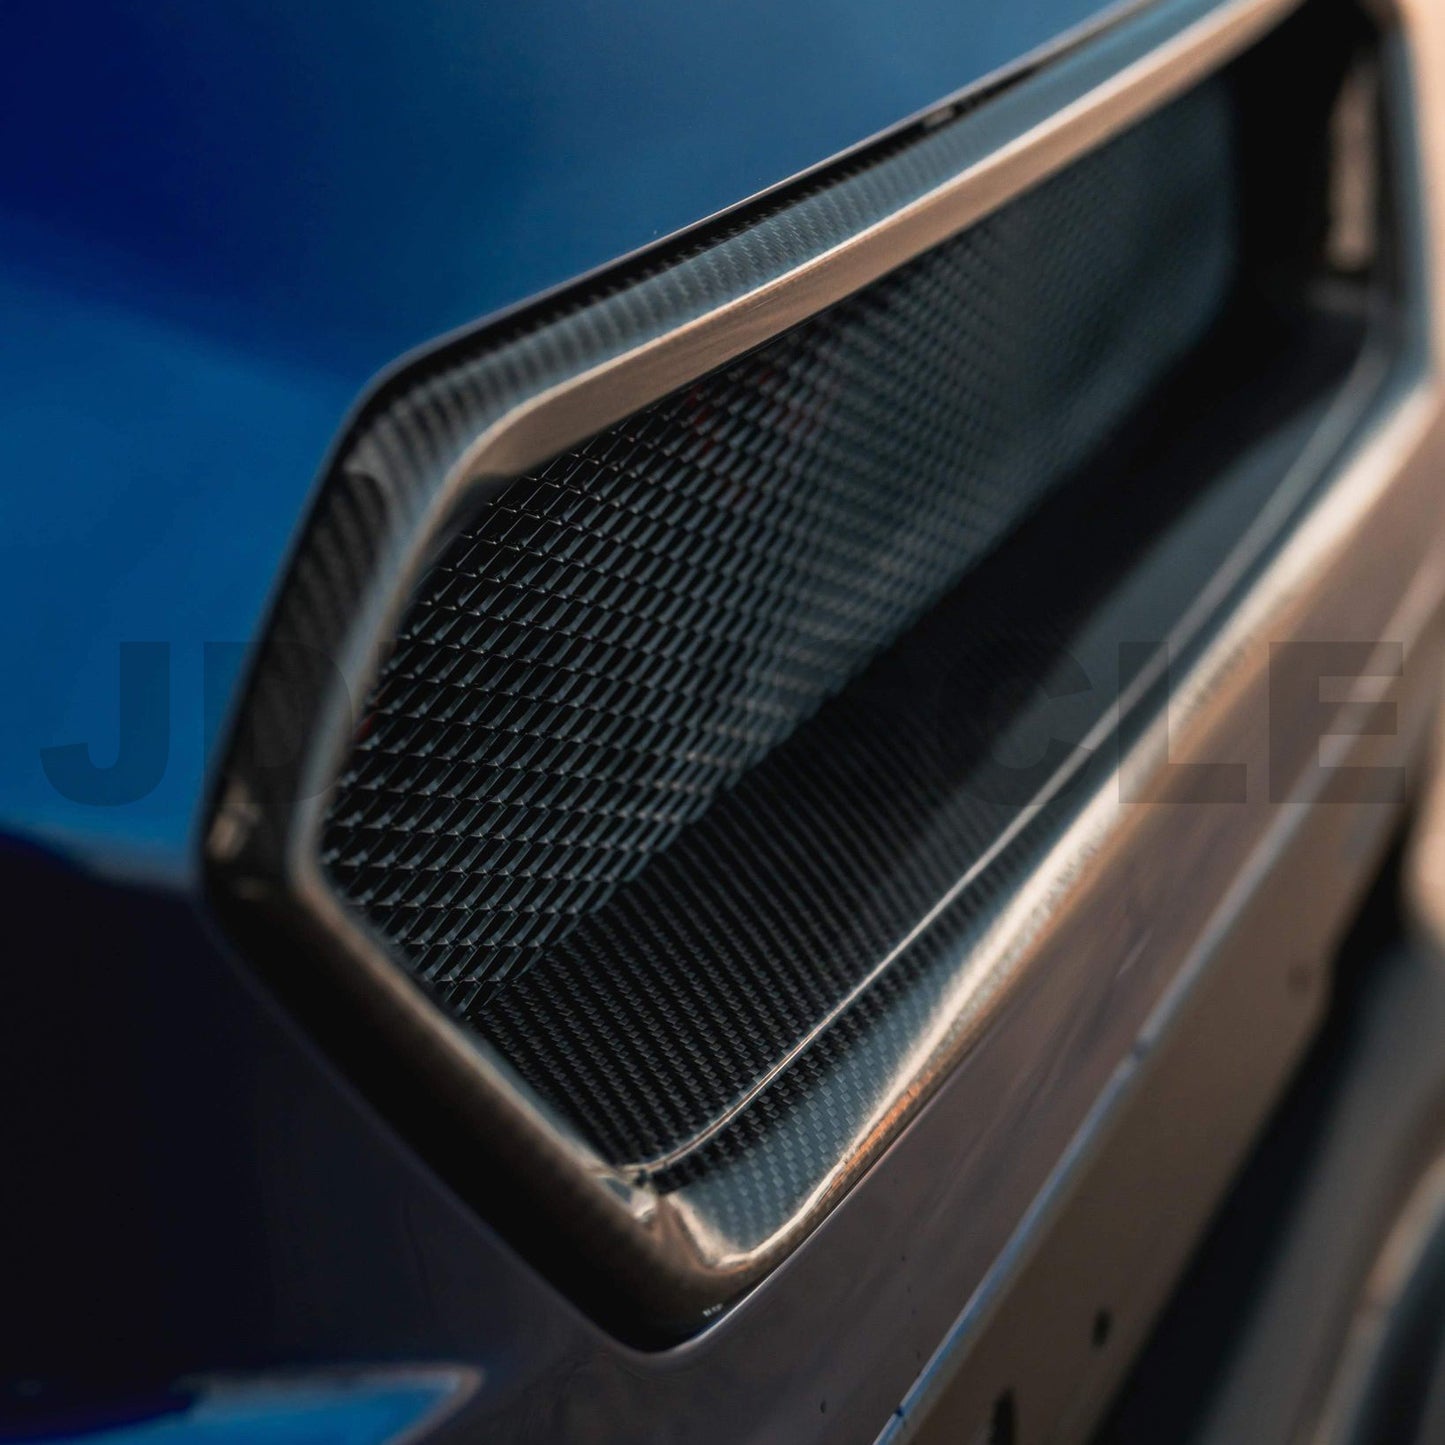 JDMuscle 18-21 WRX/STI Tanso Carbon Fiber Grille V2 - Honey Comb Forged and Partial Paint-Matched